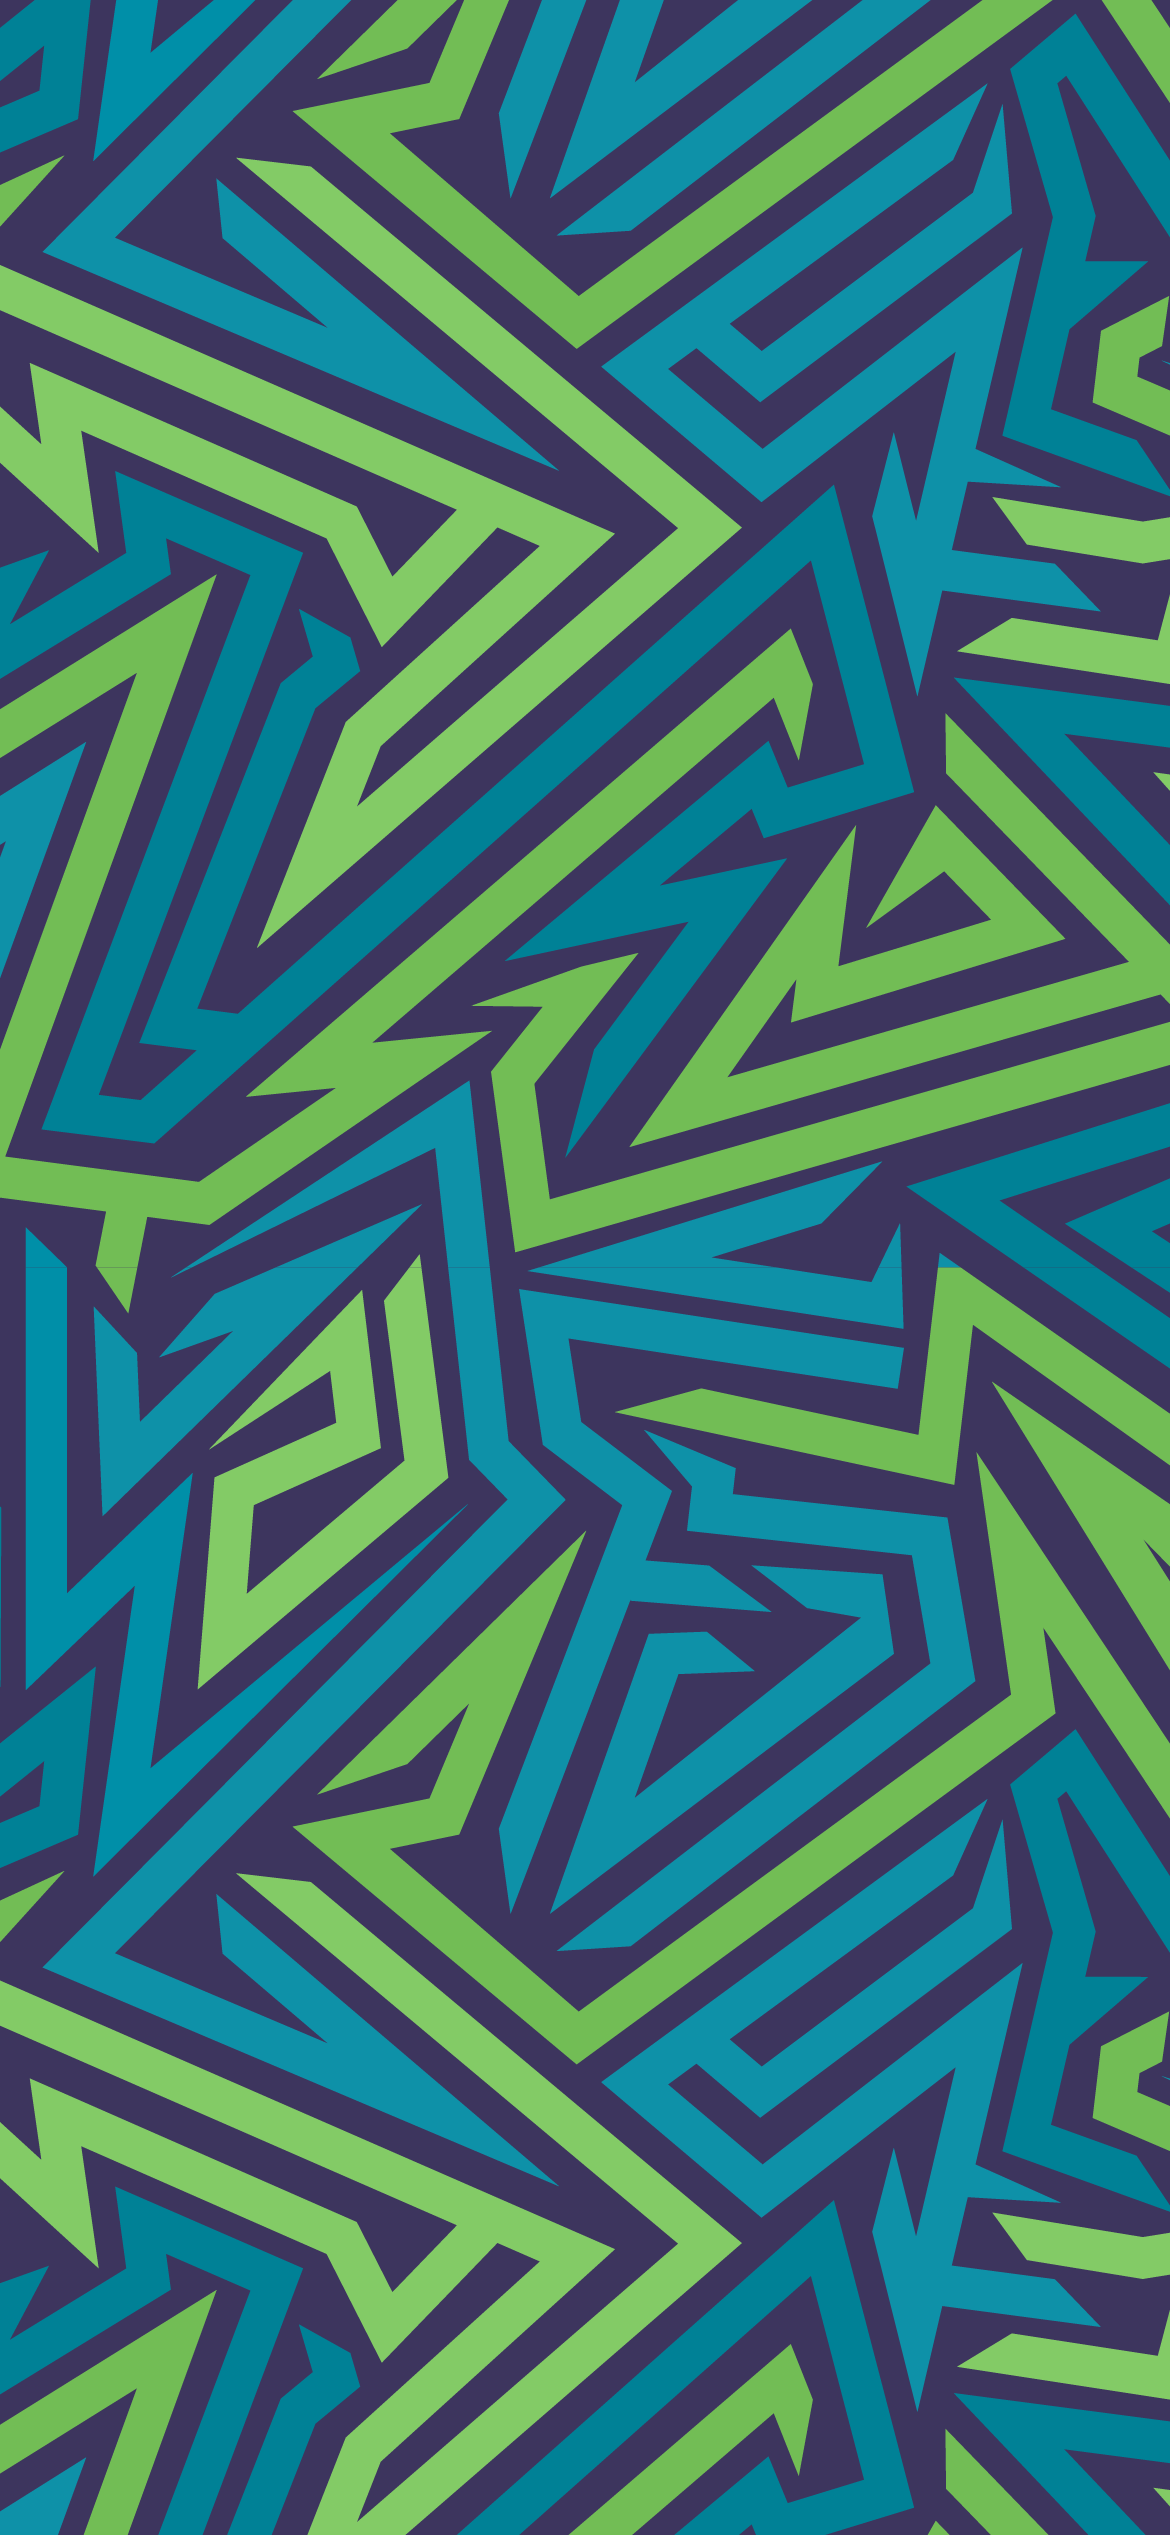 ABSTRACT AND RADICAL PATTERN TO USE AS BACKGROUND WALLPAPER ON IPHONE AND ANDROID DEVICE.